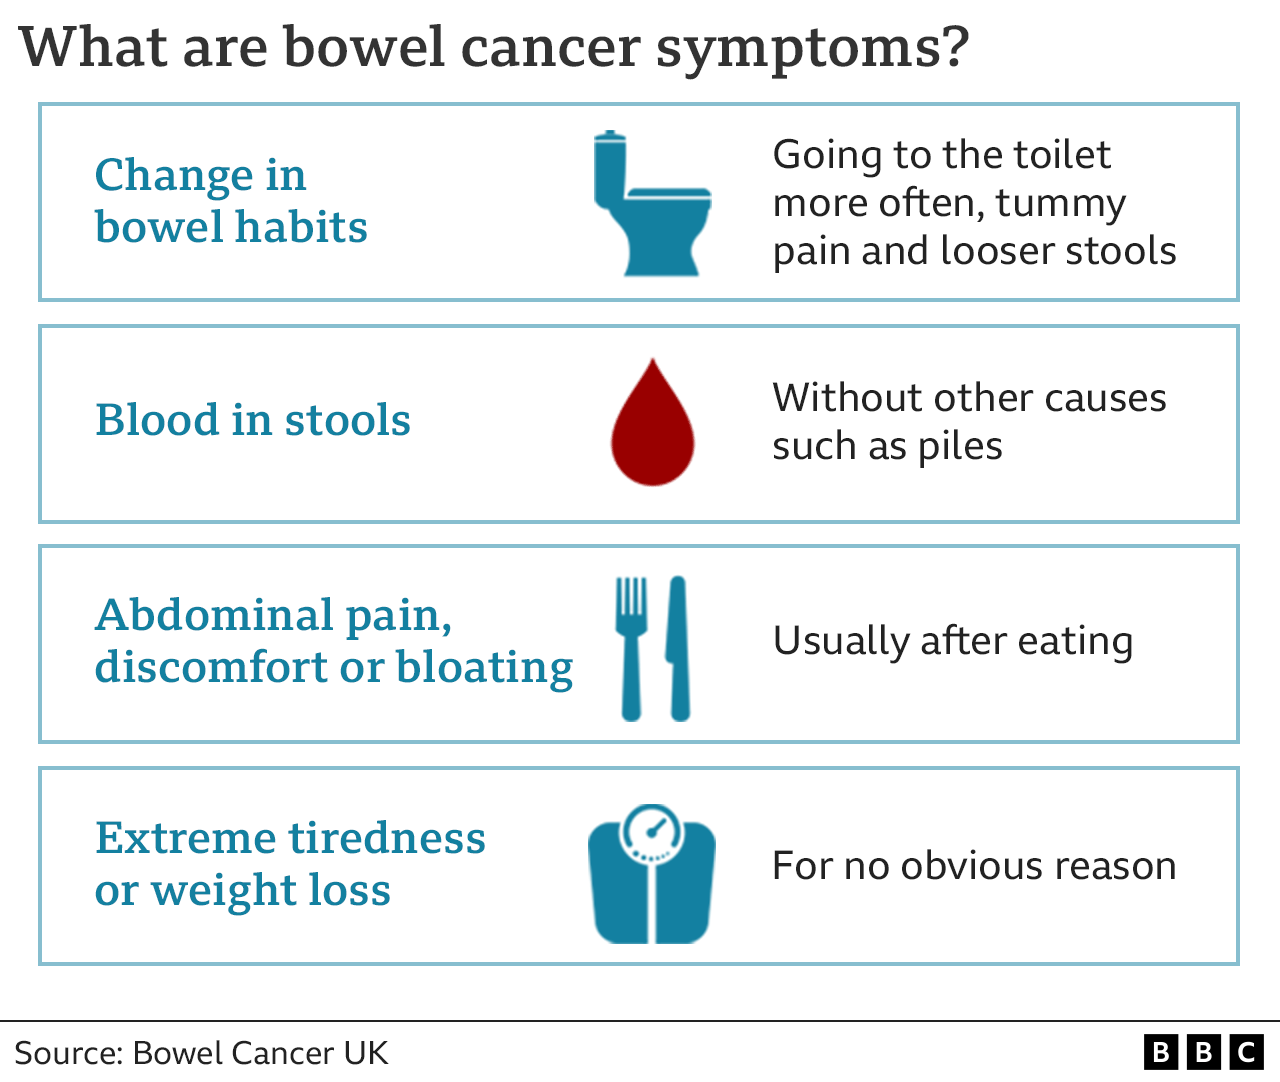 What are the symptoms of bowel cancer?